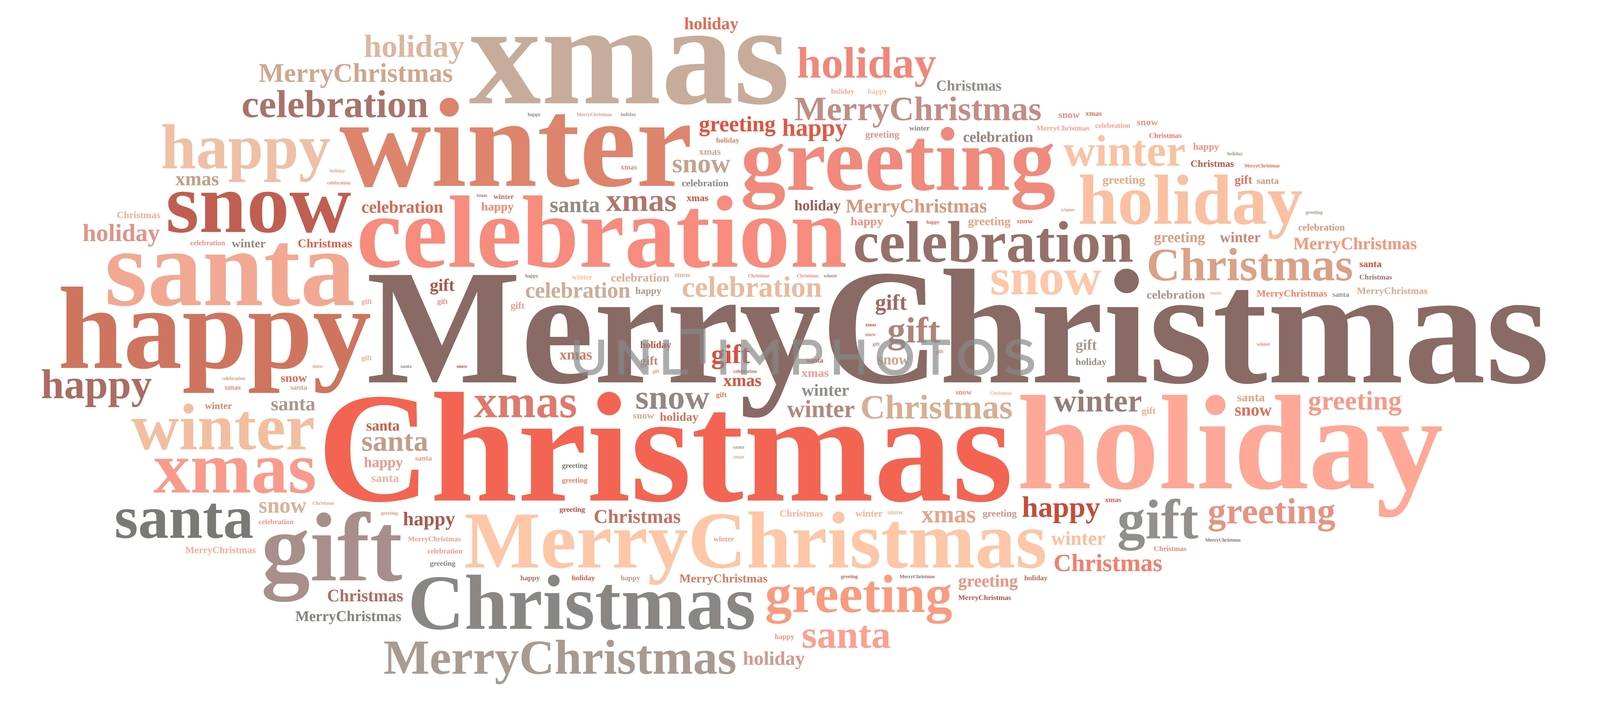 Illustration with word cloud about Merry Christmas.